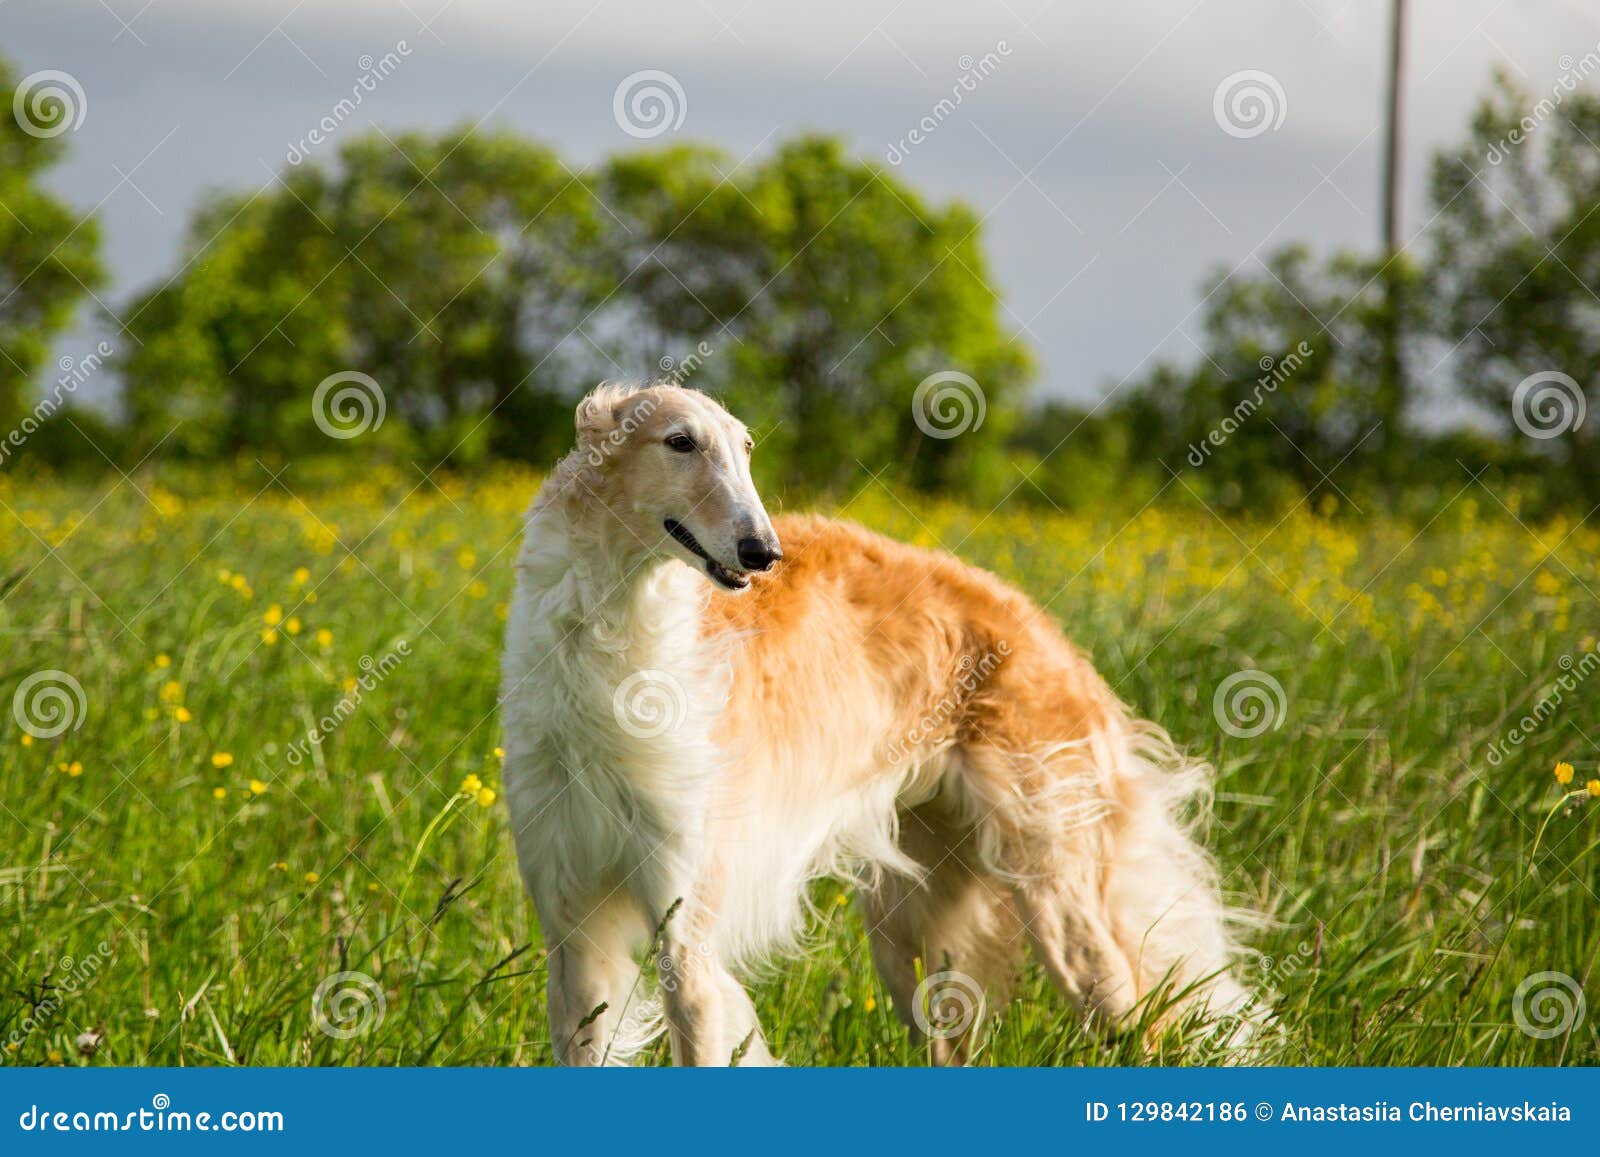 Portrait Of Beautiful Dog Breed Russian Borzoi Standing In The Green Grass And Yellow Buttercup Field In Summer Stock Photo Image Of Hunt Copyspace 129842186